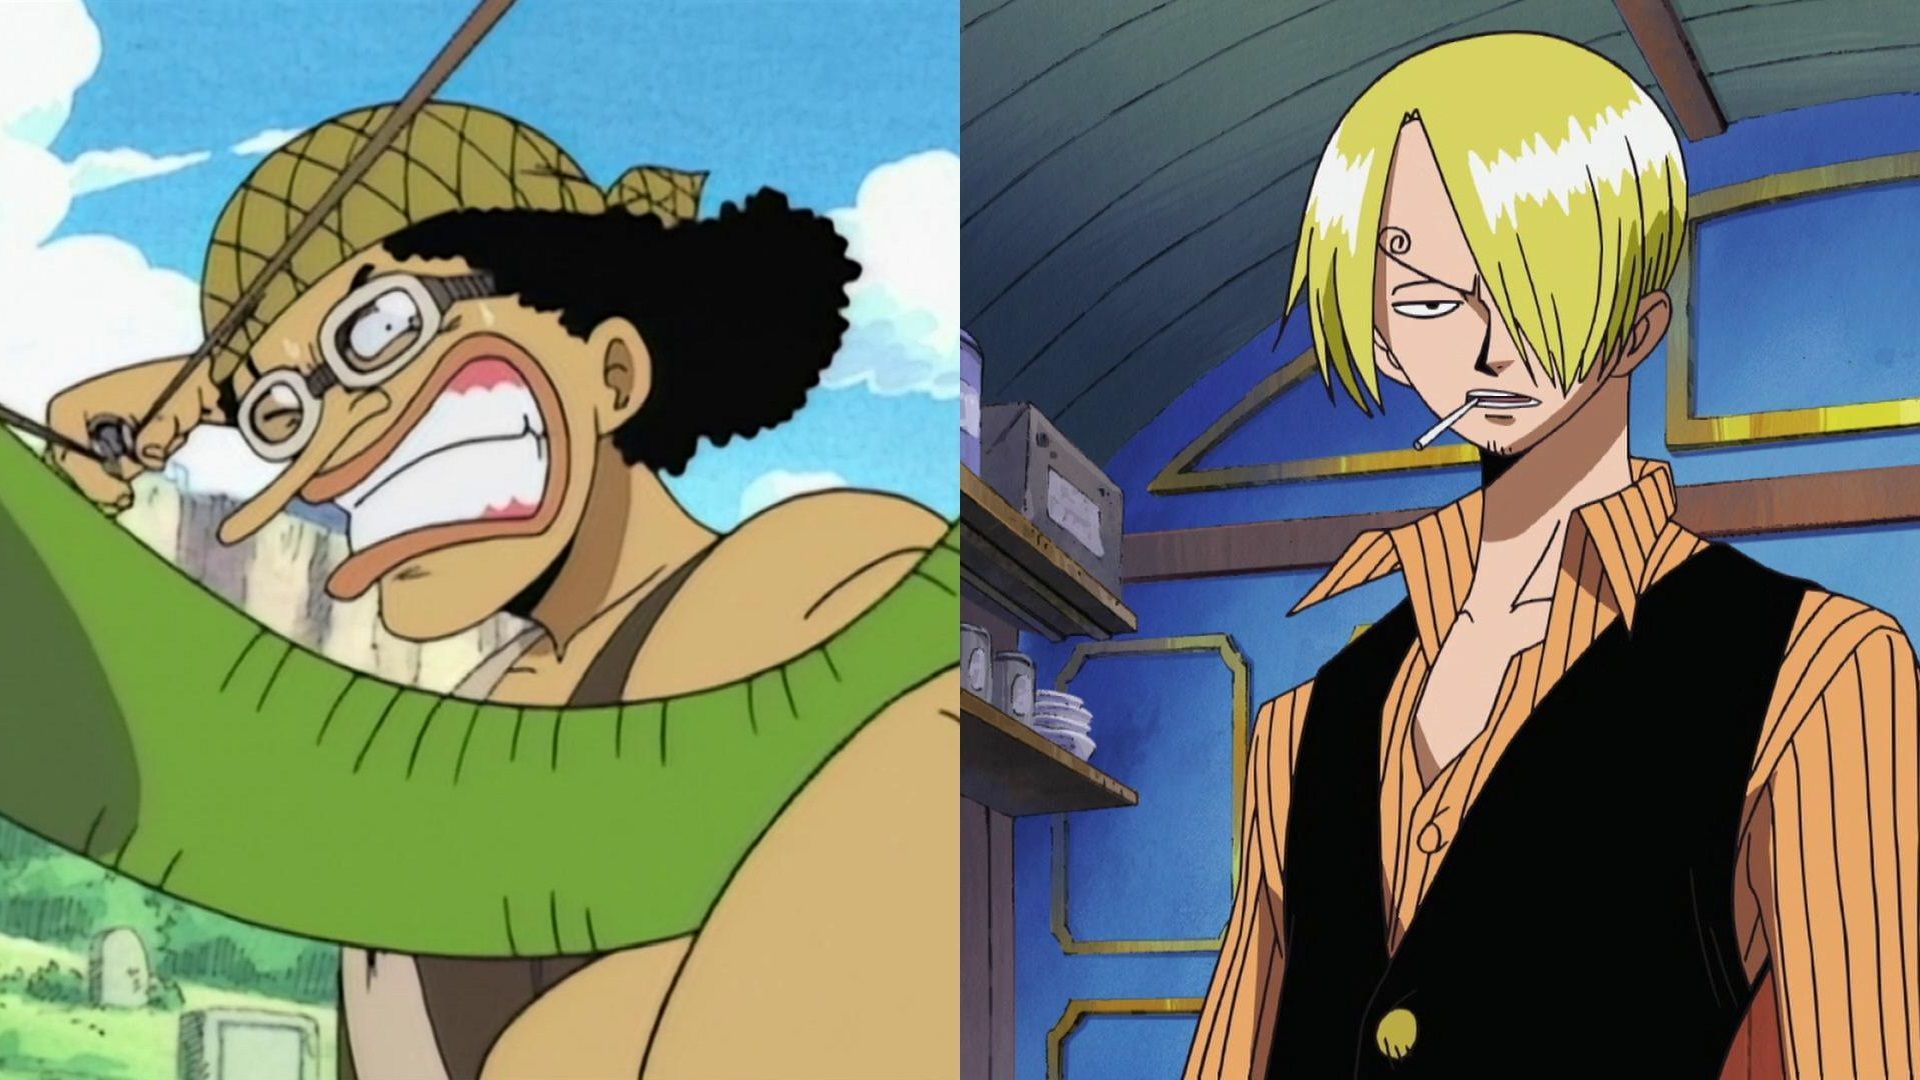 Usopp and Sanji&#039;s typical facial traits as seen in the anime (Image via Toei Animation, One Piece)